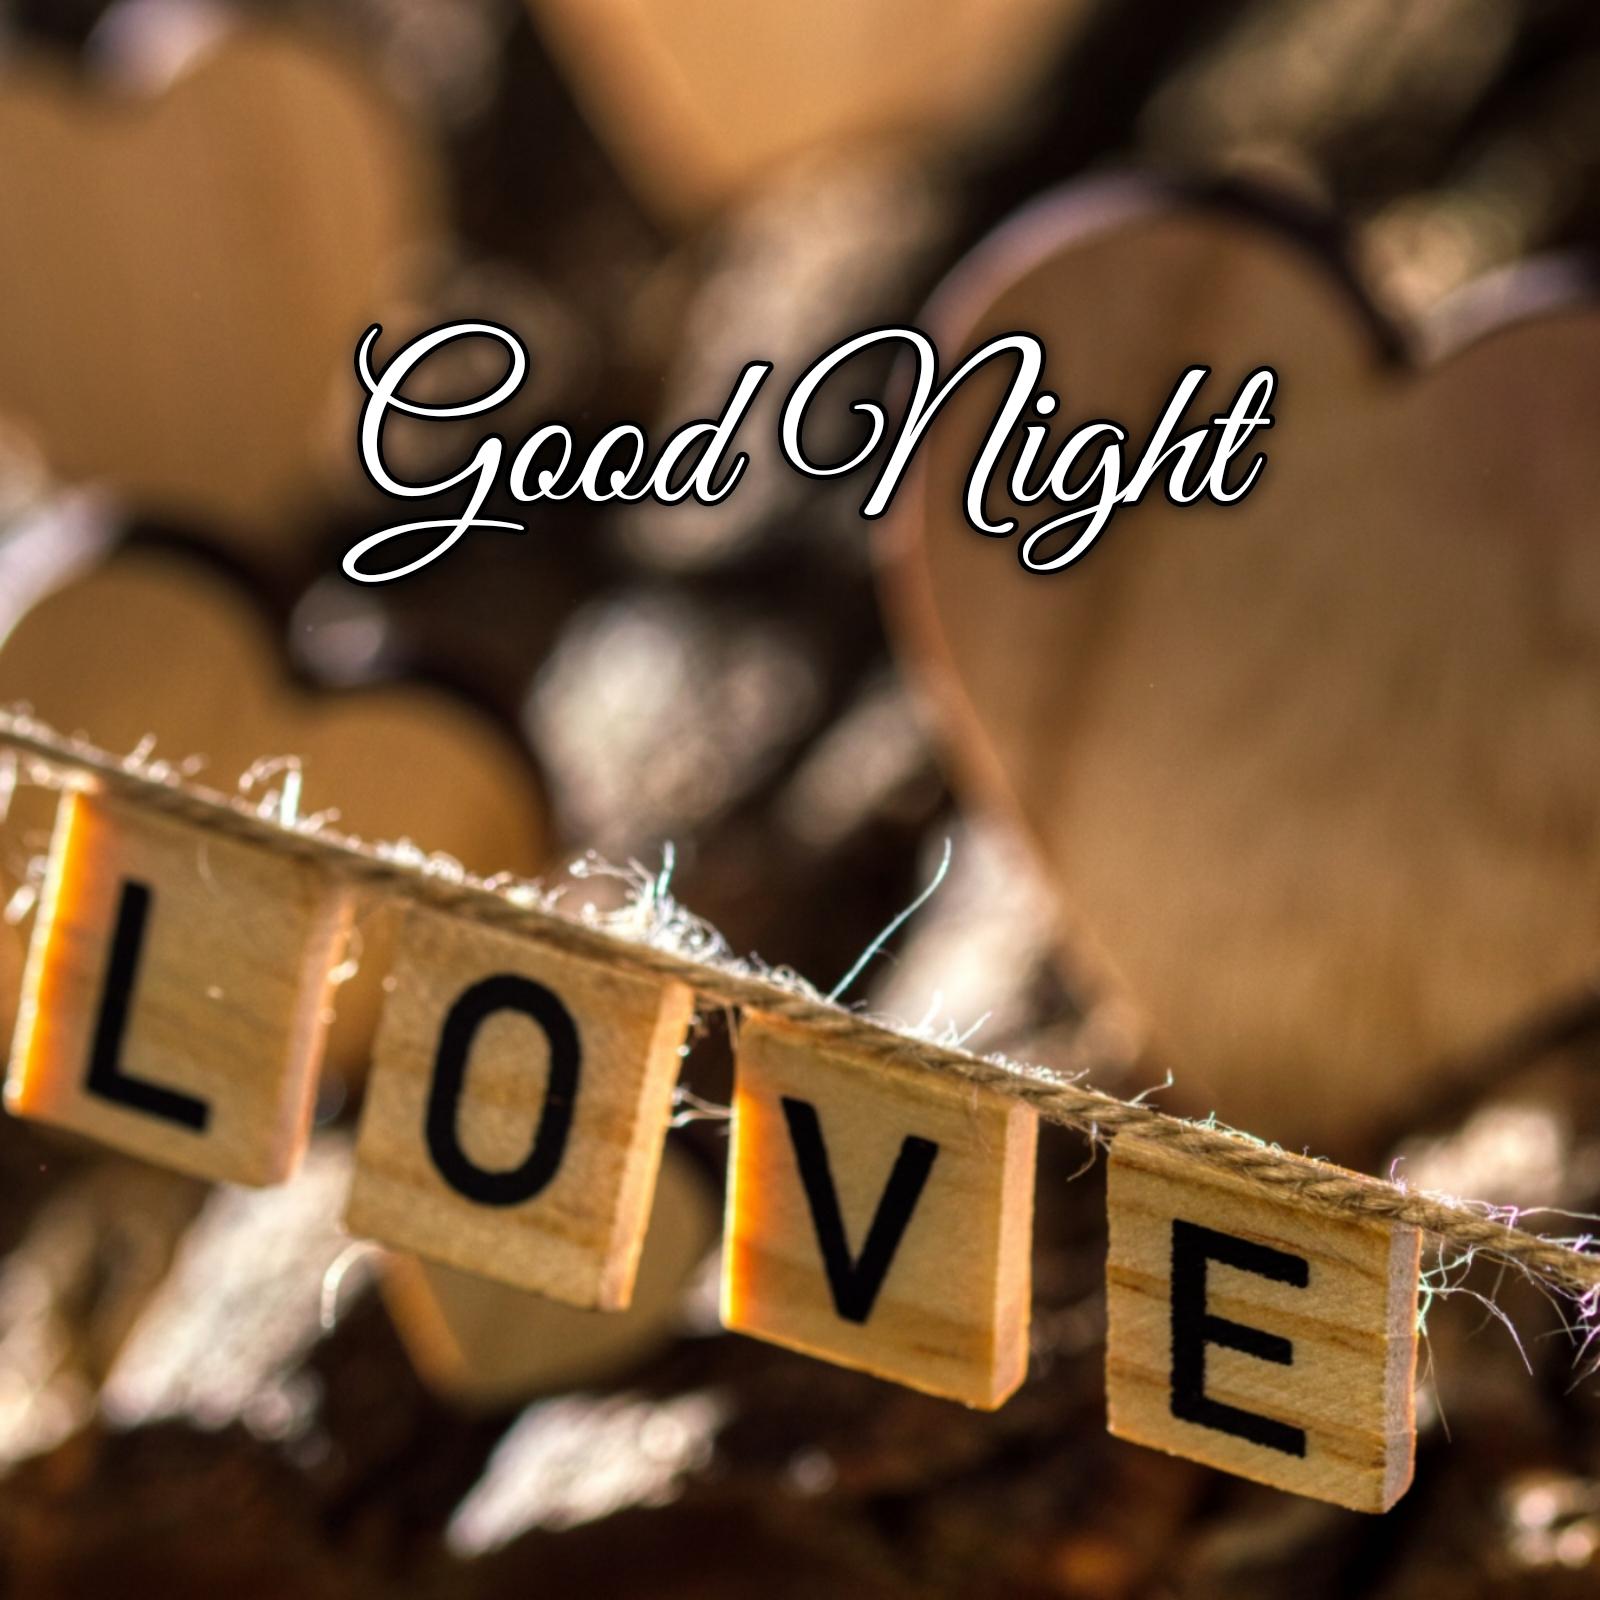 Night Love Images